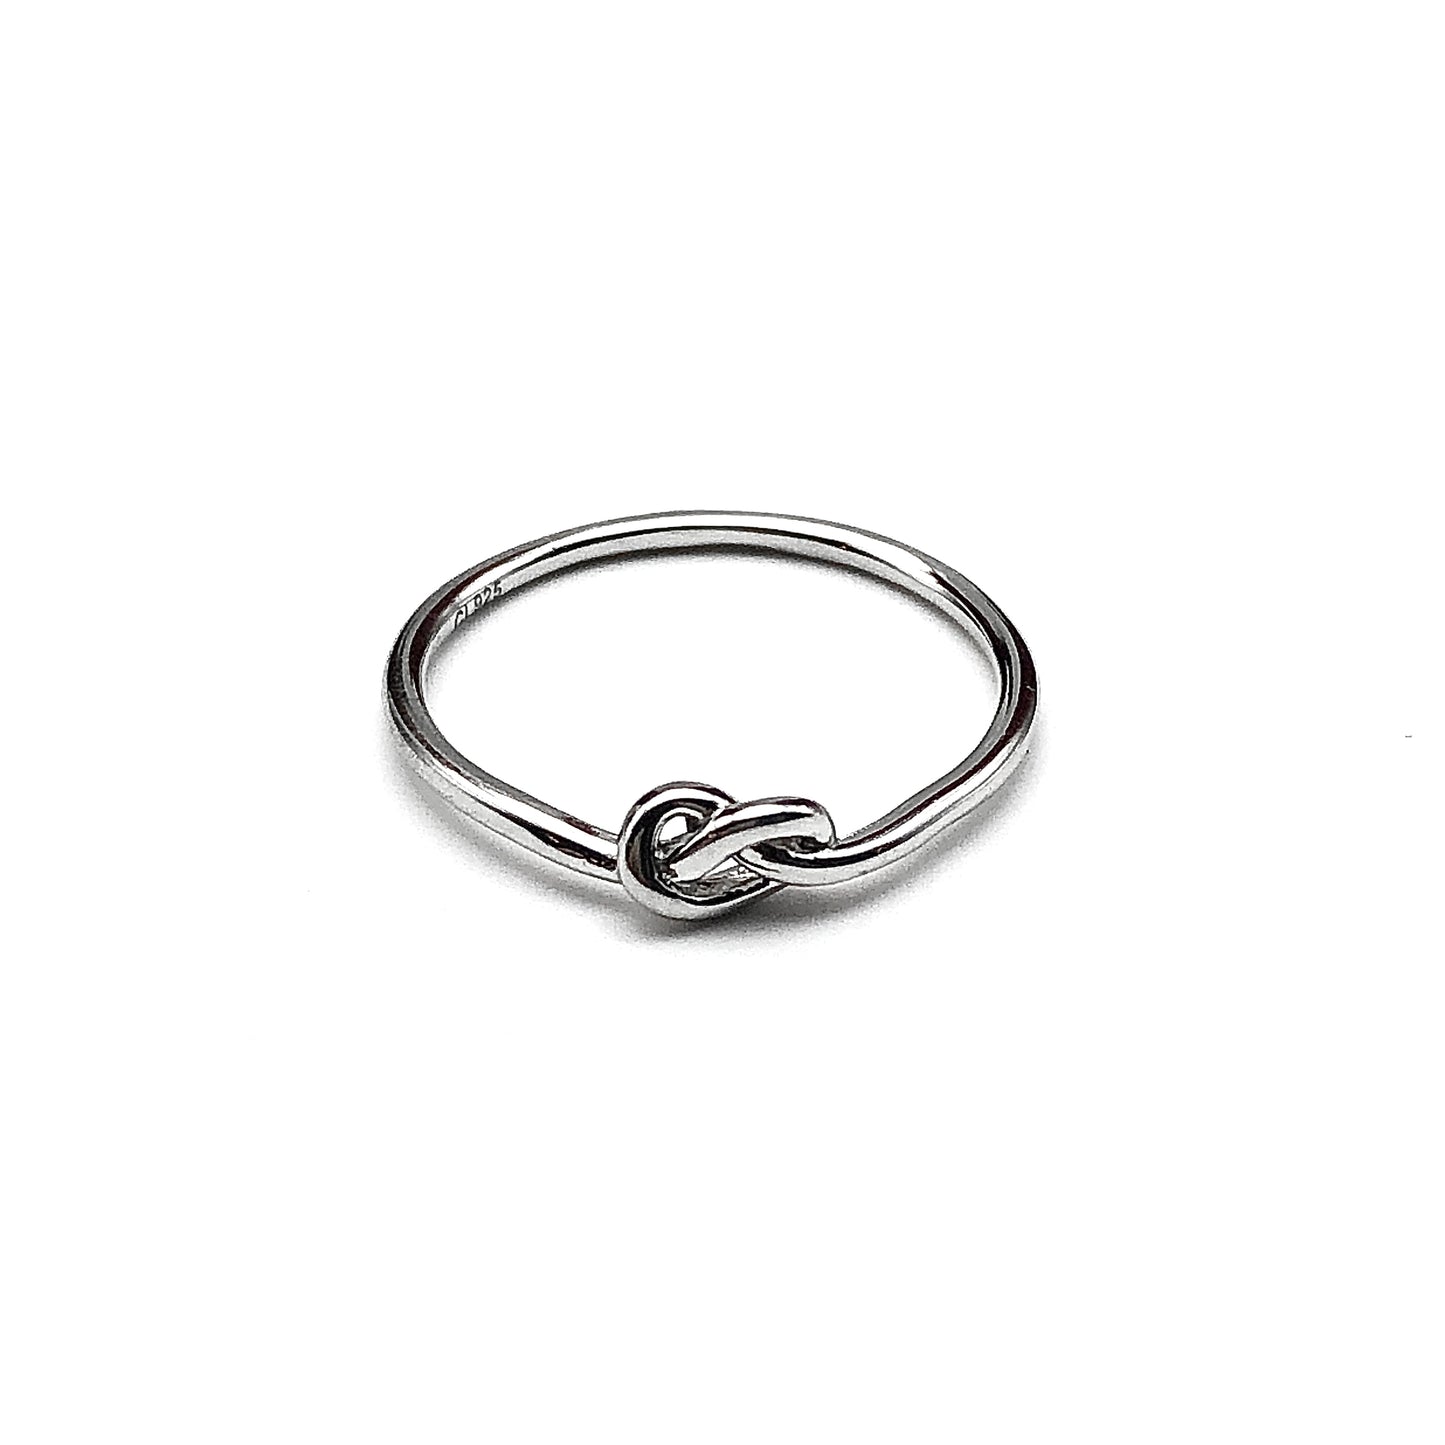 Sterling Silver Ring, sz7.25 Dainty Pretzel Style Love Knot Design Thin Band